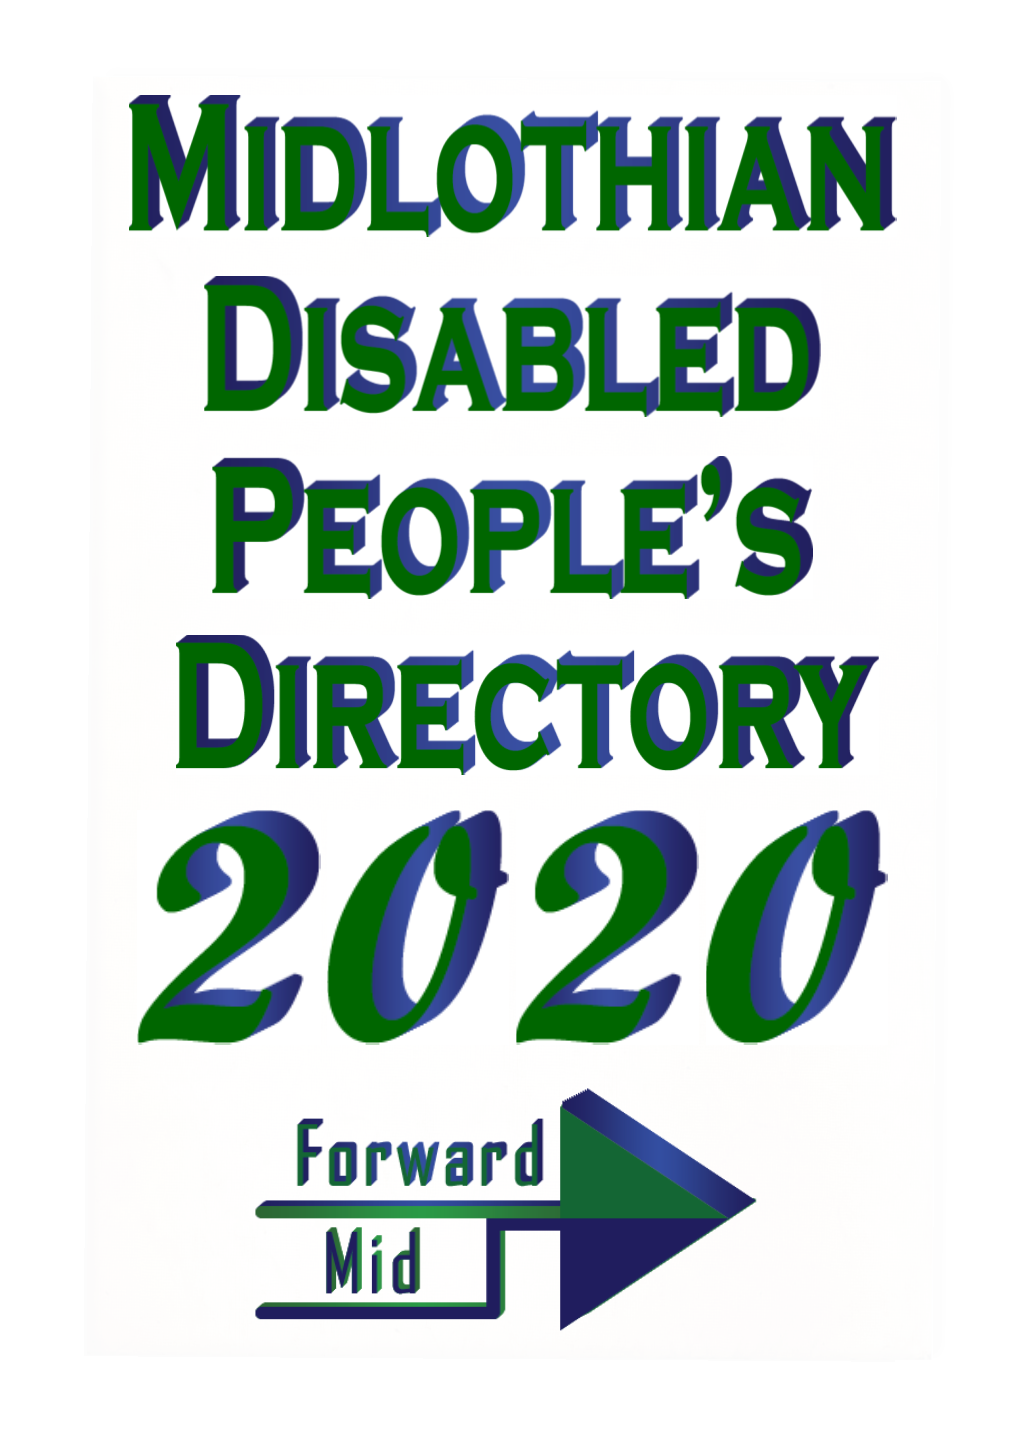 2020 Disabled People's Directory